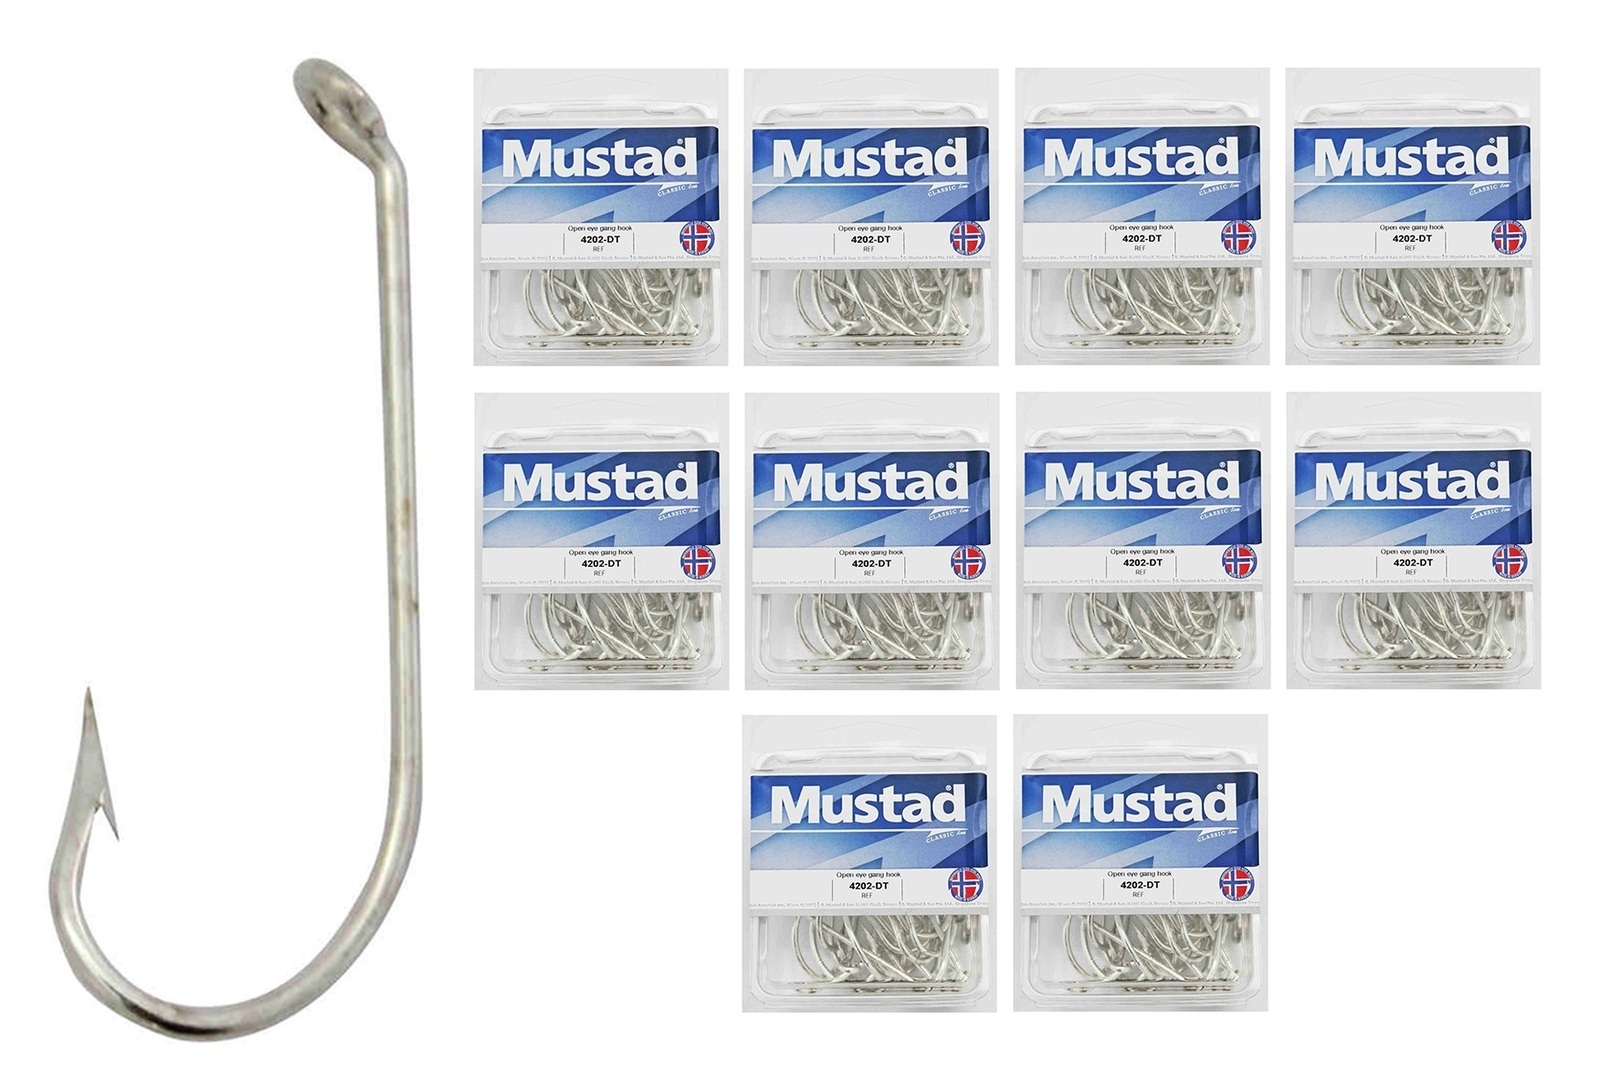 10 Boxes of Mustad 4202D 2x Strong Kirby Open Eye Fishing Hooks - Size 4/0